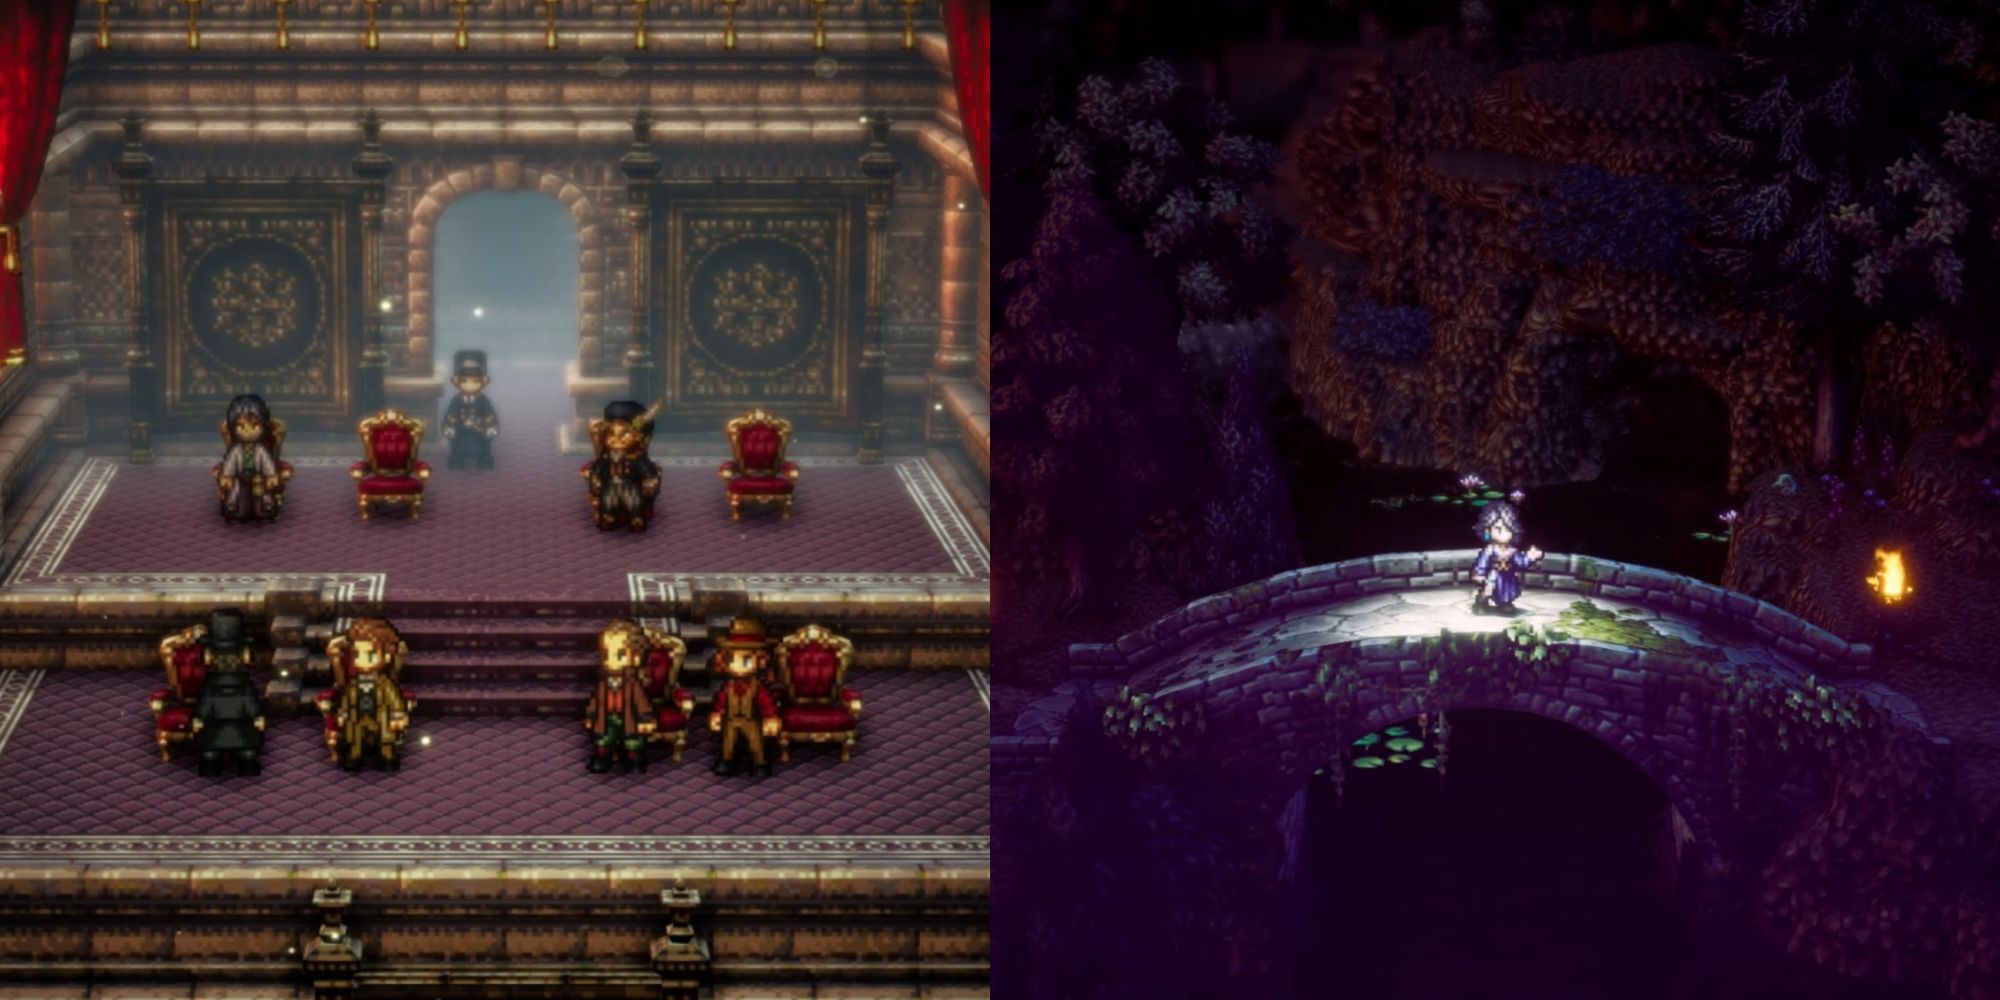 Octopath Traveler 2: Most Memorable Quotes featuring Kazan and other NPCs on the left, and Throne on the right